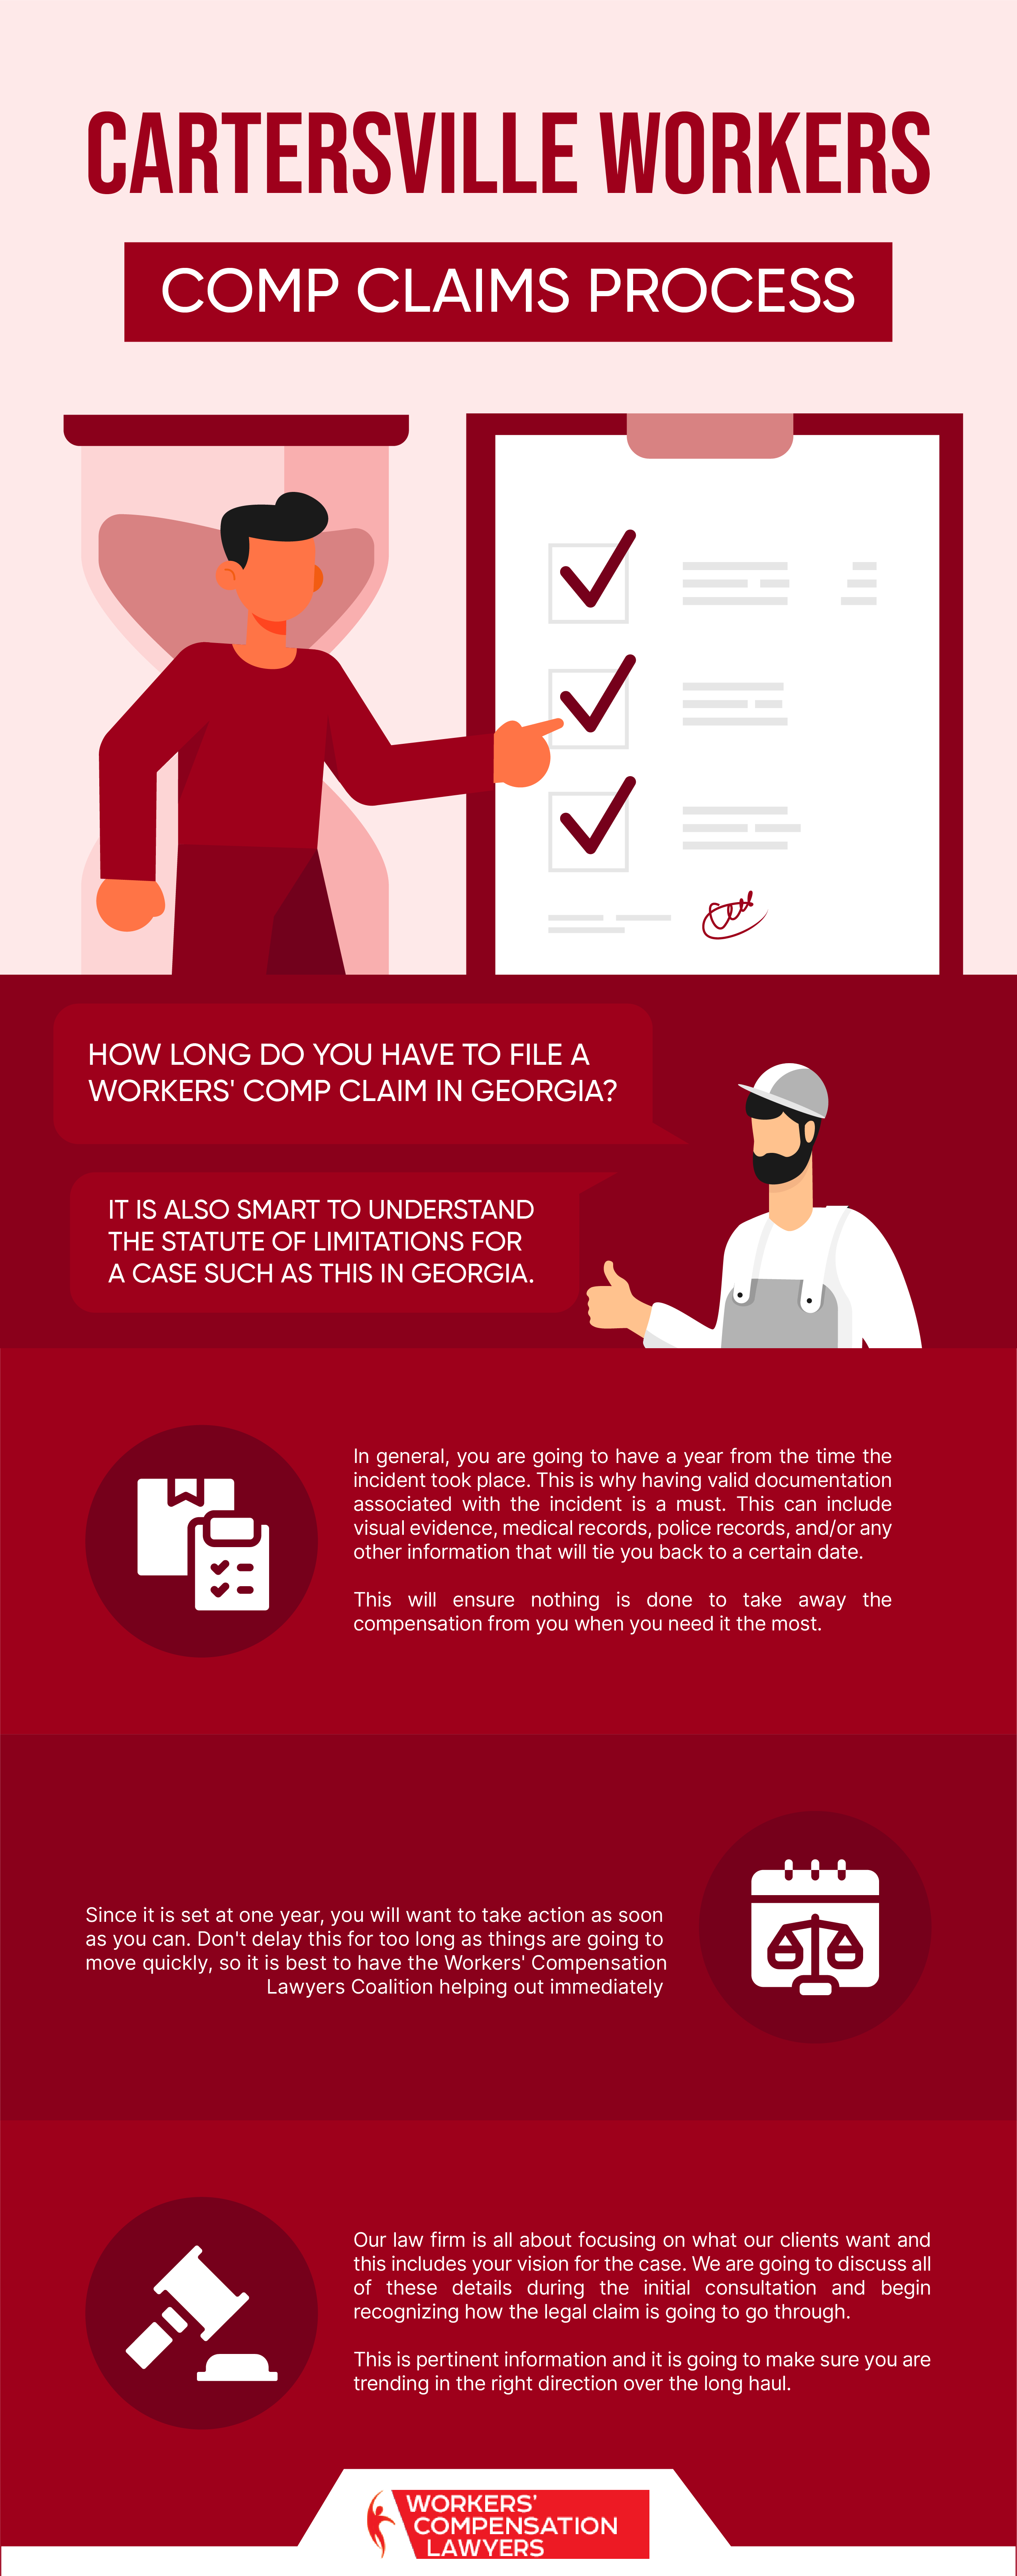 Cartersville Workers Compensation Claims Process Infographic